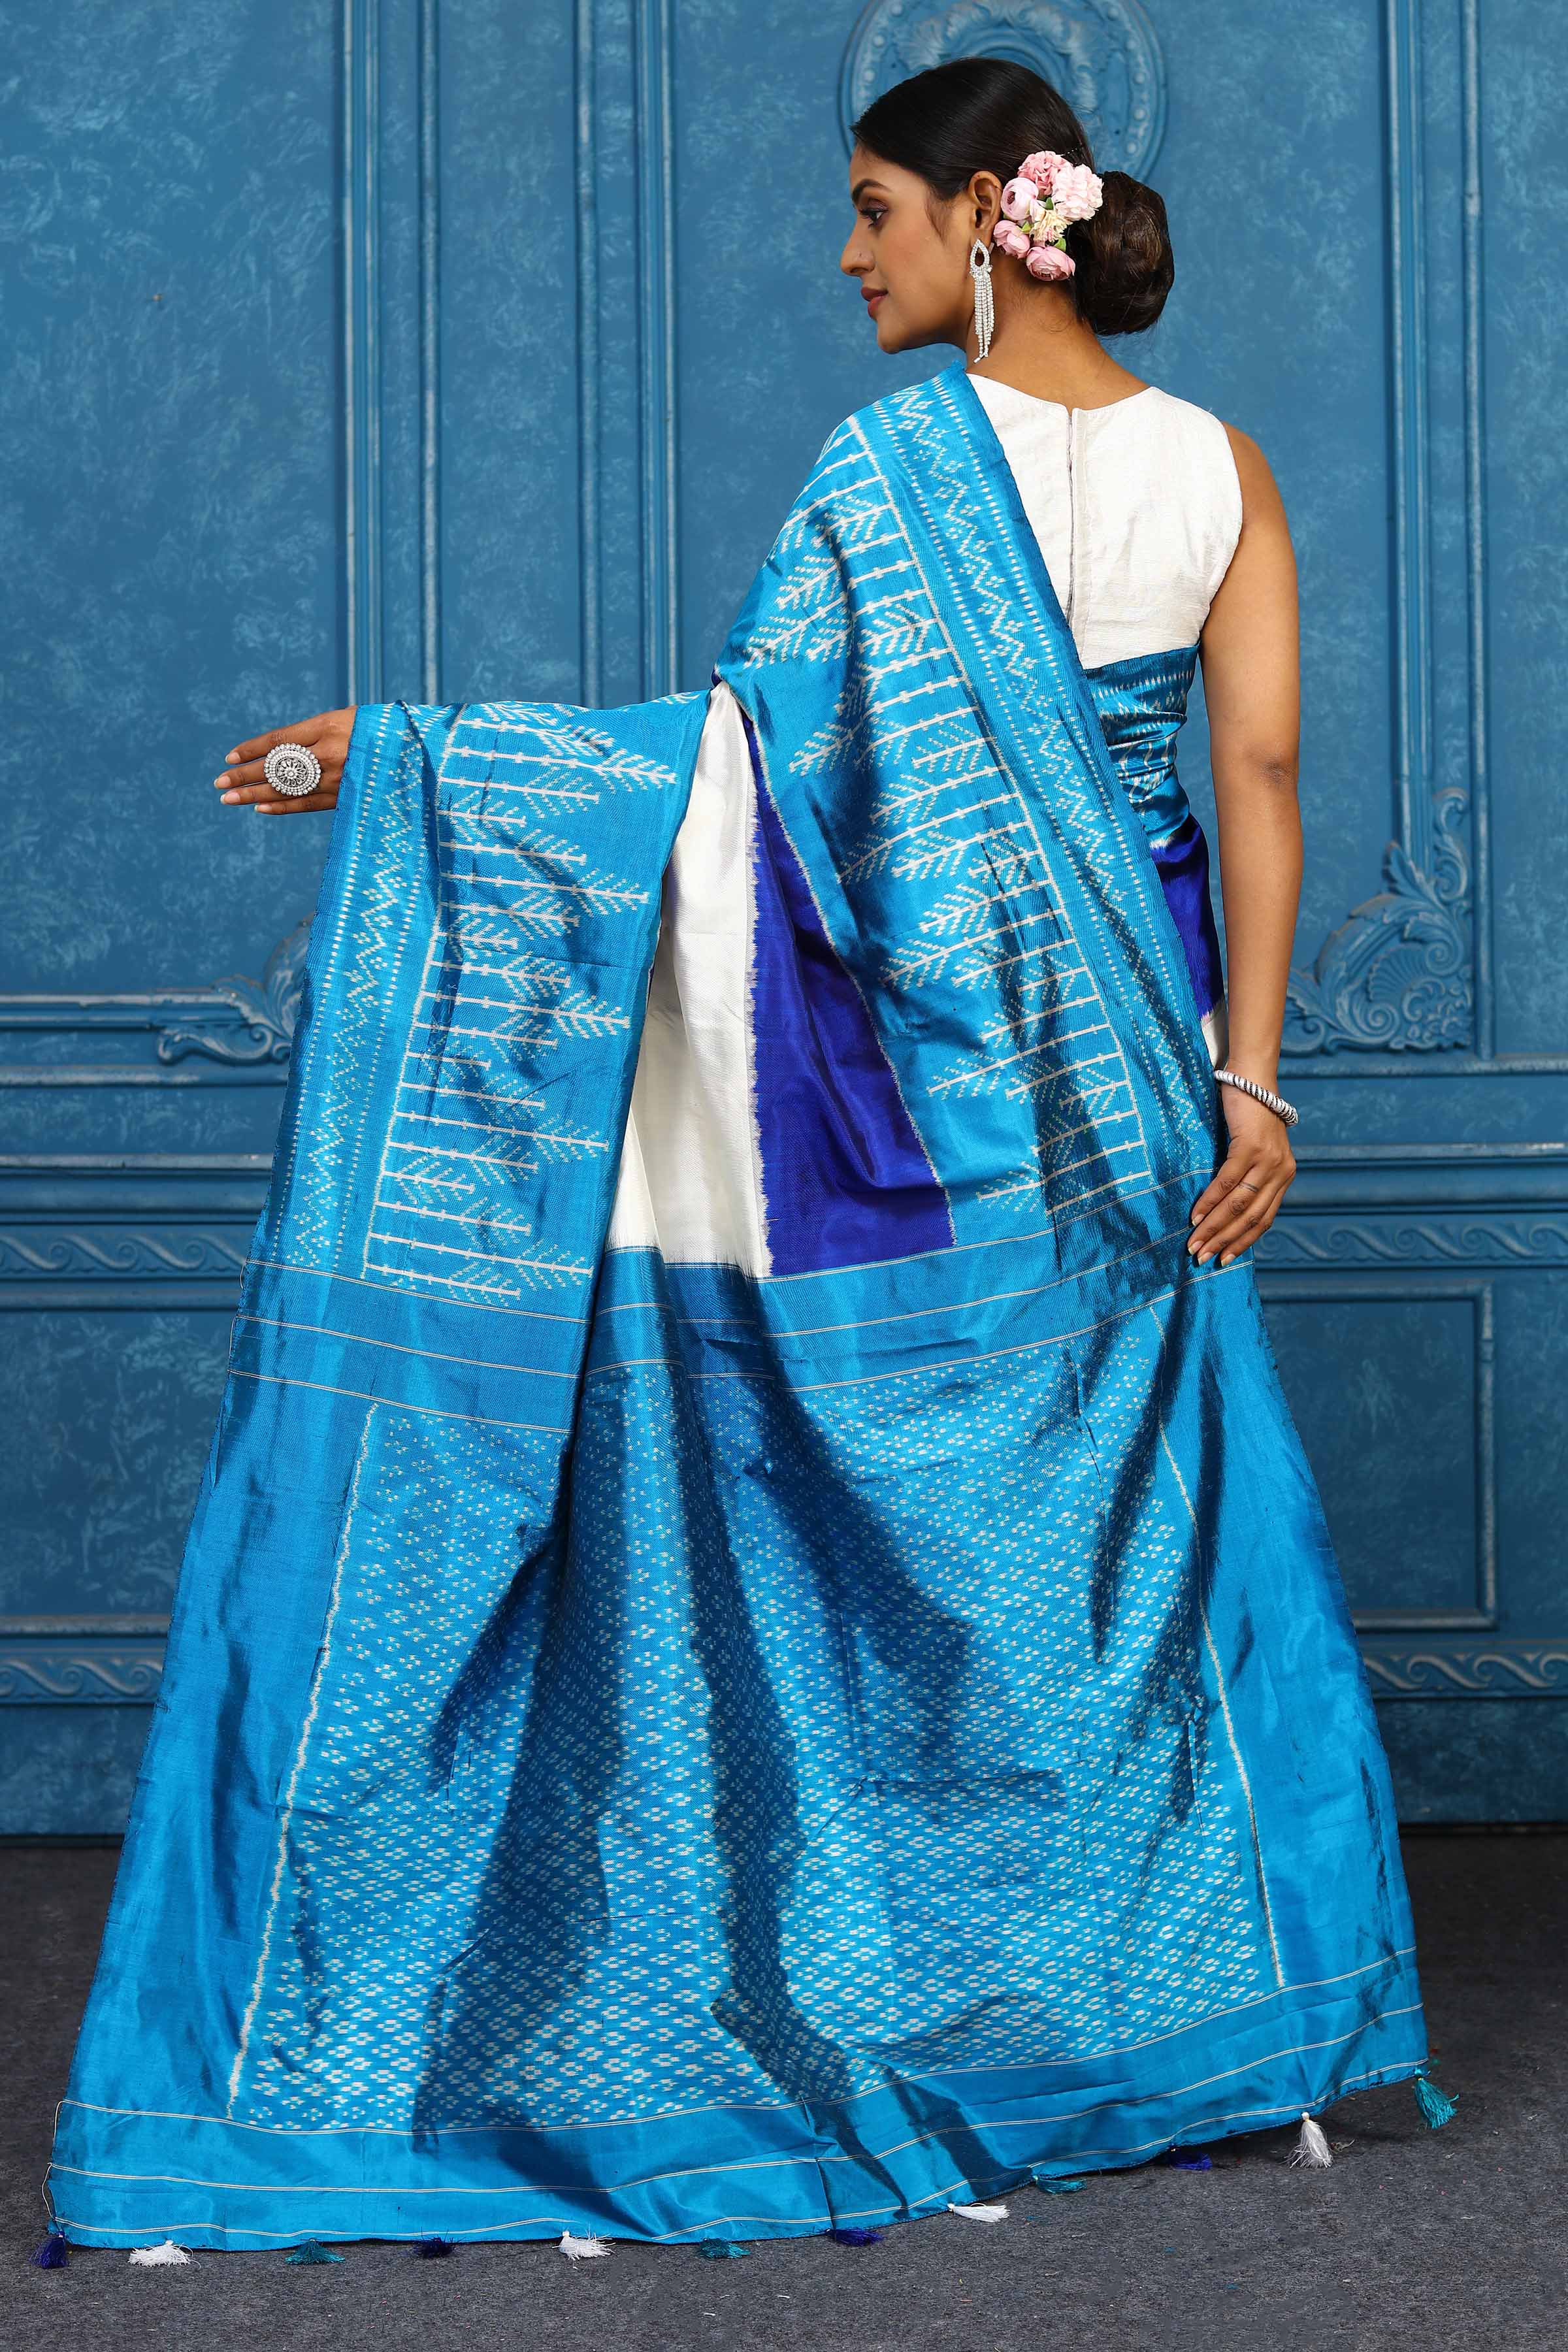 Shop cream and blue pochampally silk ikkat sari online in USA. Look your best on festive occasions in latest designer sarees, pure silk sarees, Kanchipuram sarees, handwoven sarees, tussar silk sarees, embroidered sarees from Pure Elegance Indian clothing store in USA.-back